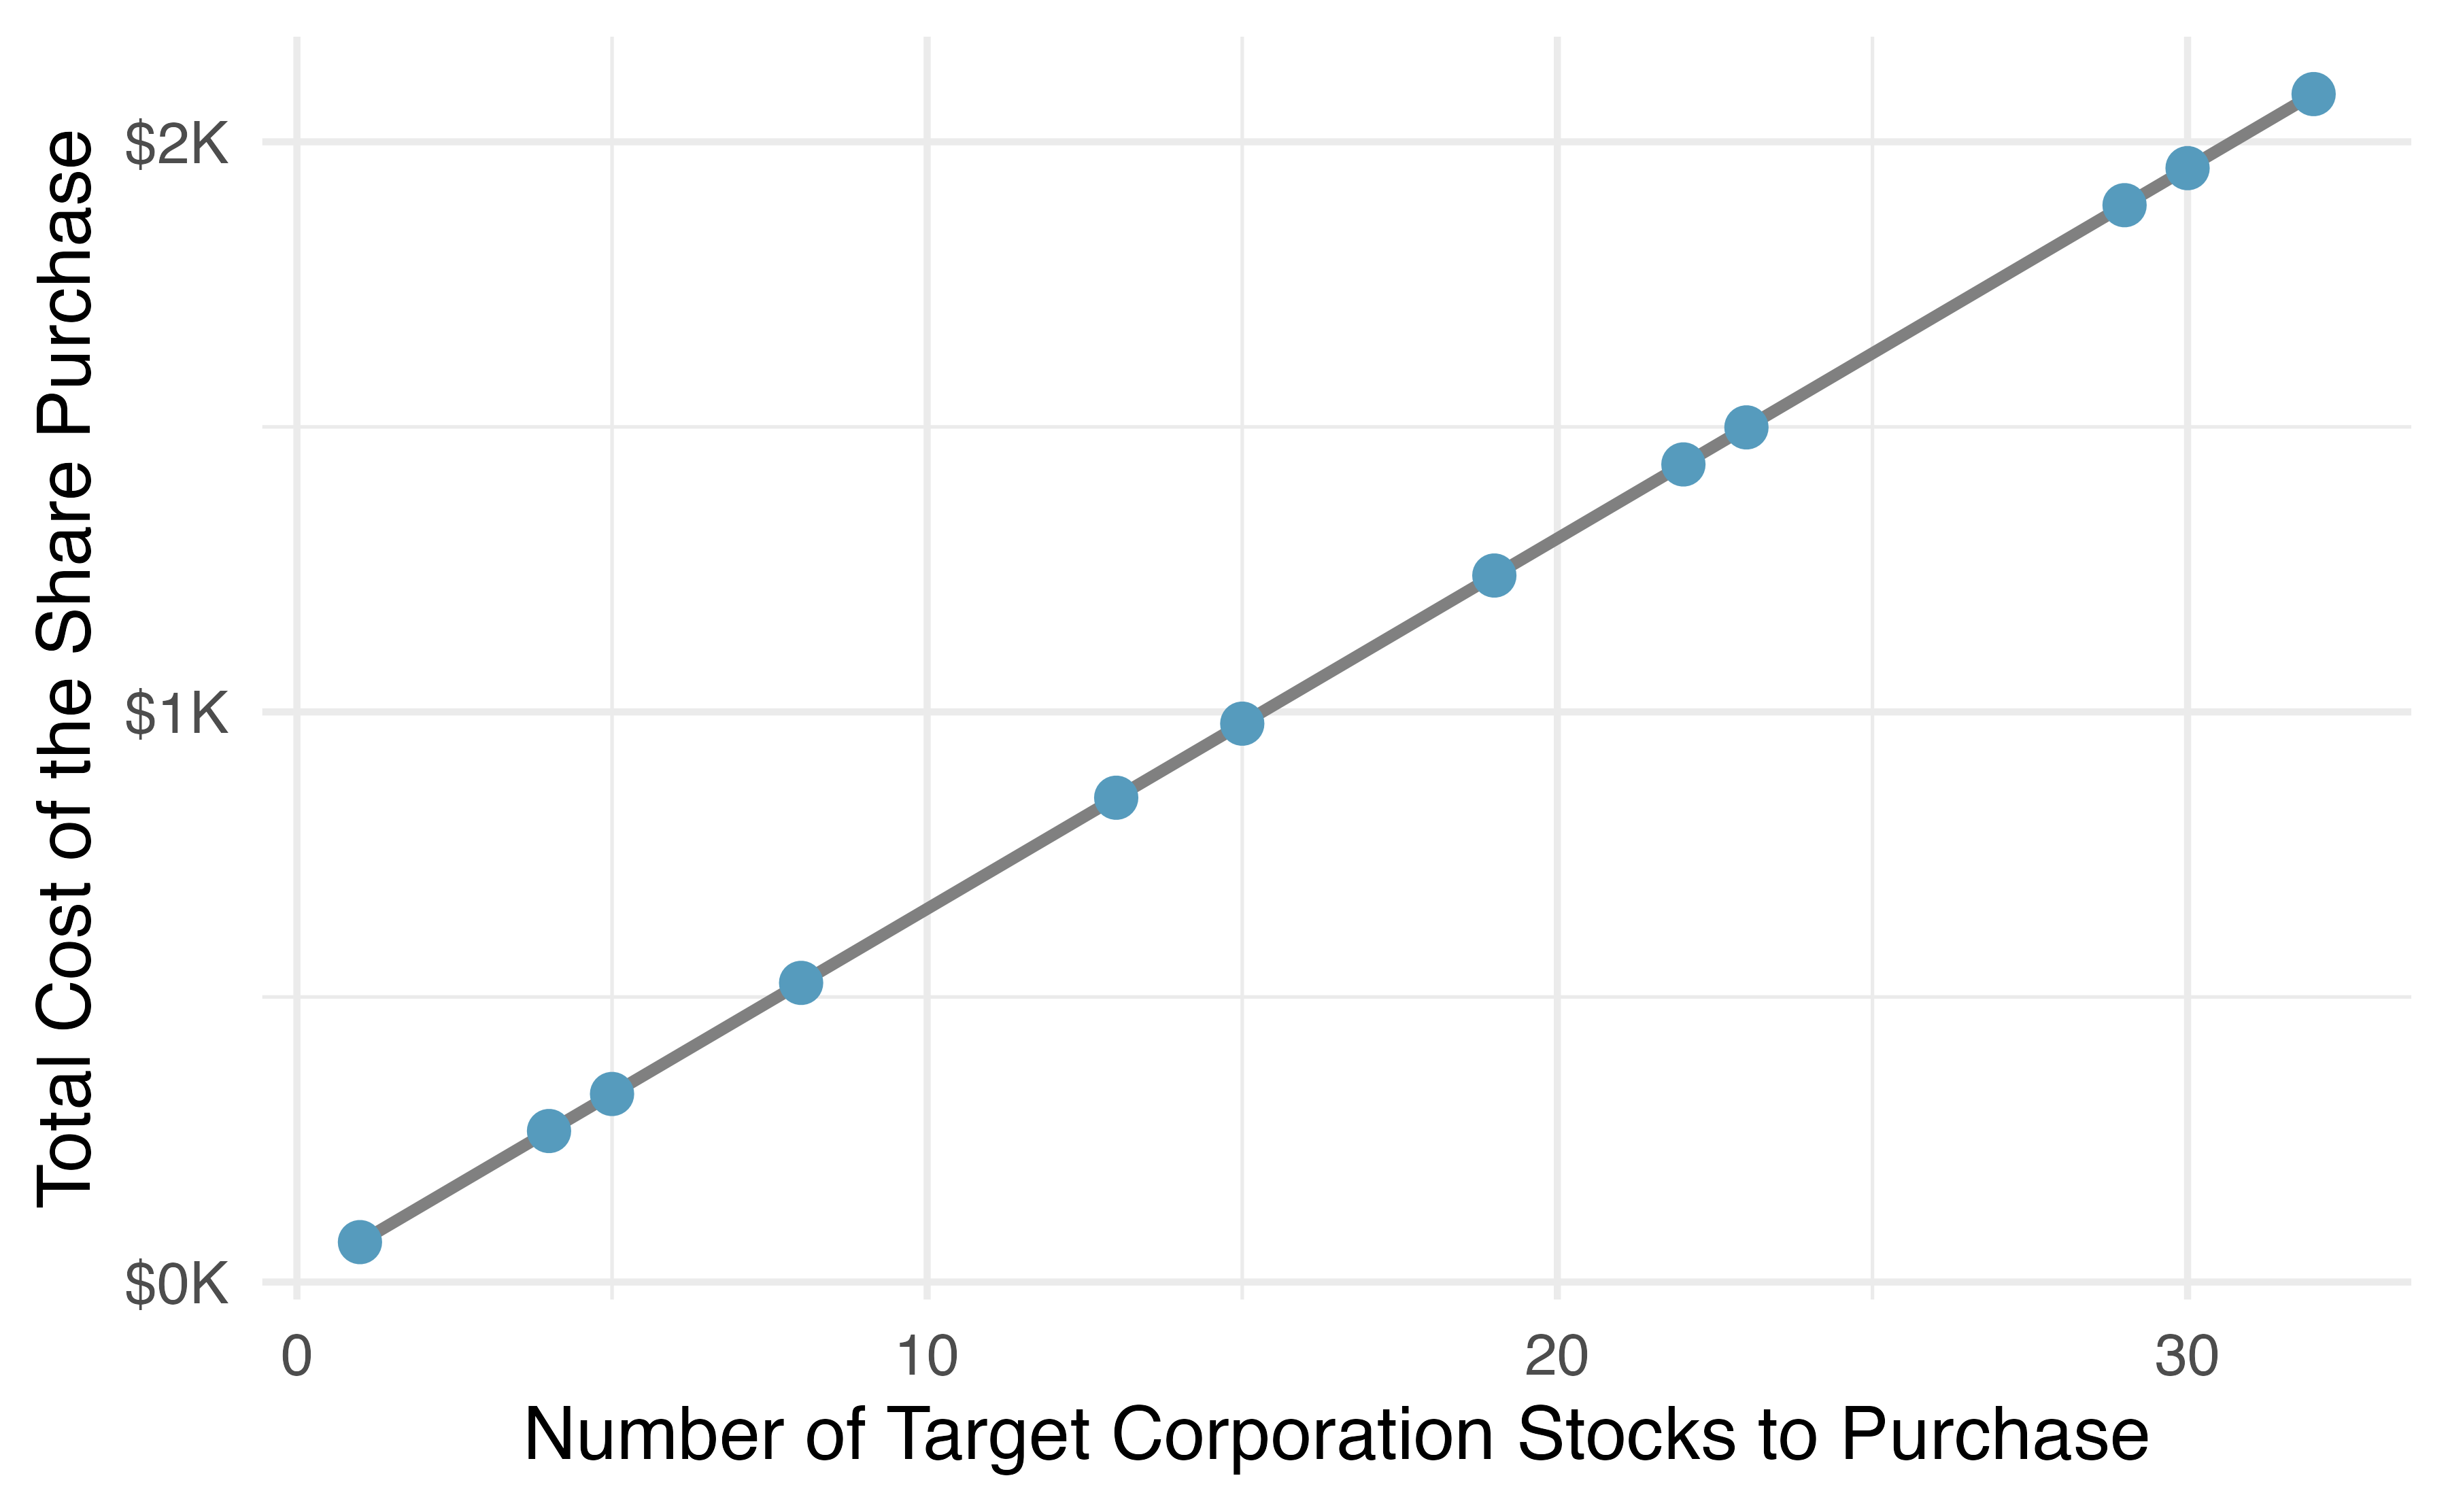 Requests from twelve separate buyers were simultaneously placed with a trading company to purchase Target Corporation stock (ticker TGT, December 28th, 2018), and the total cost of the shares were reported. Because the cost is computed using a linear formula, the linear fit is perfect.